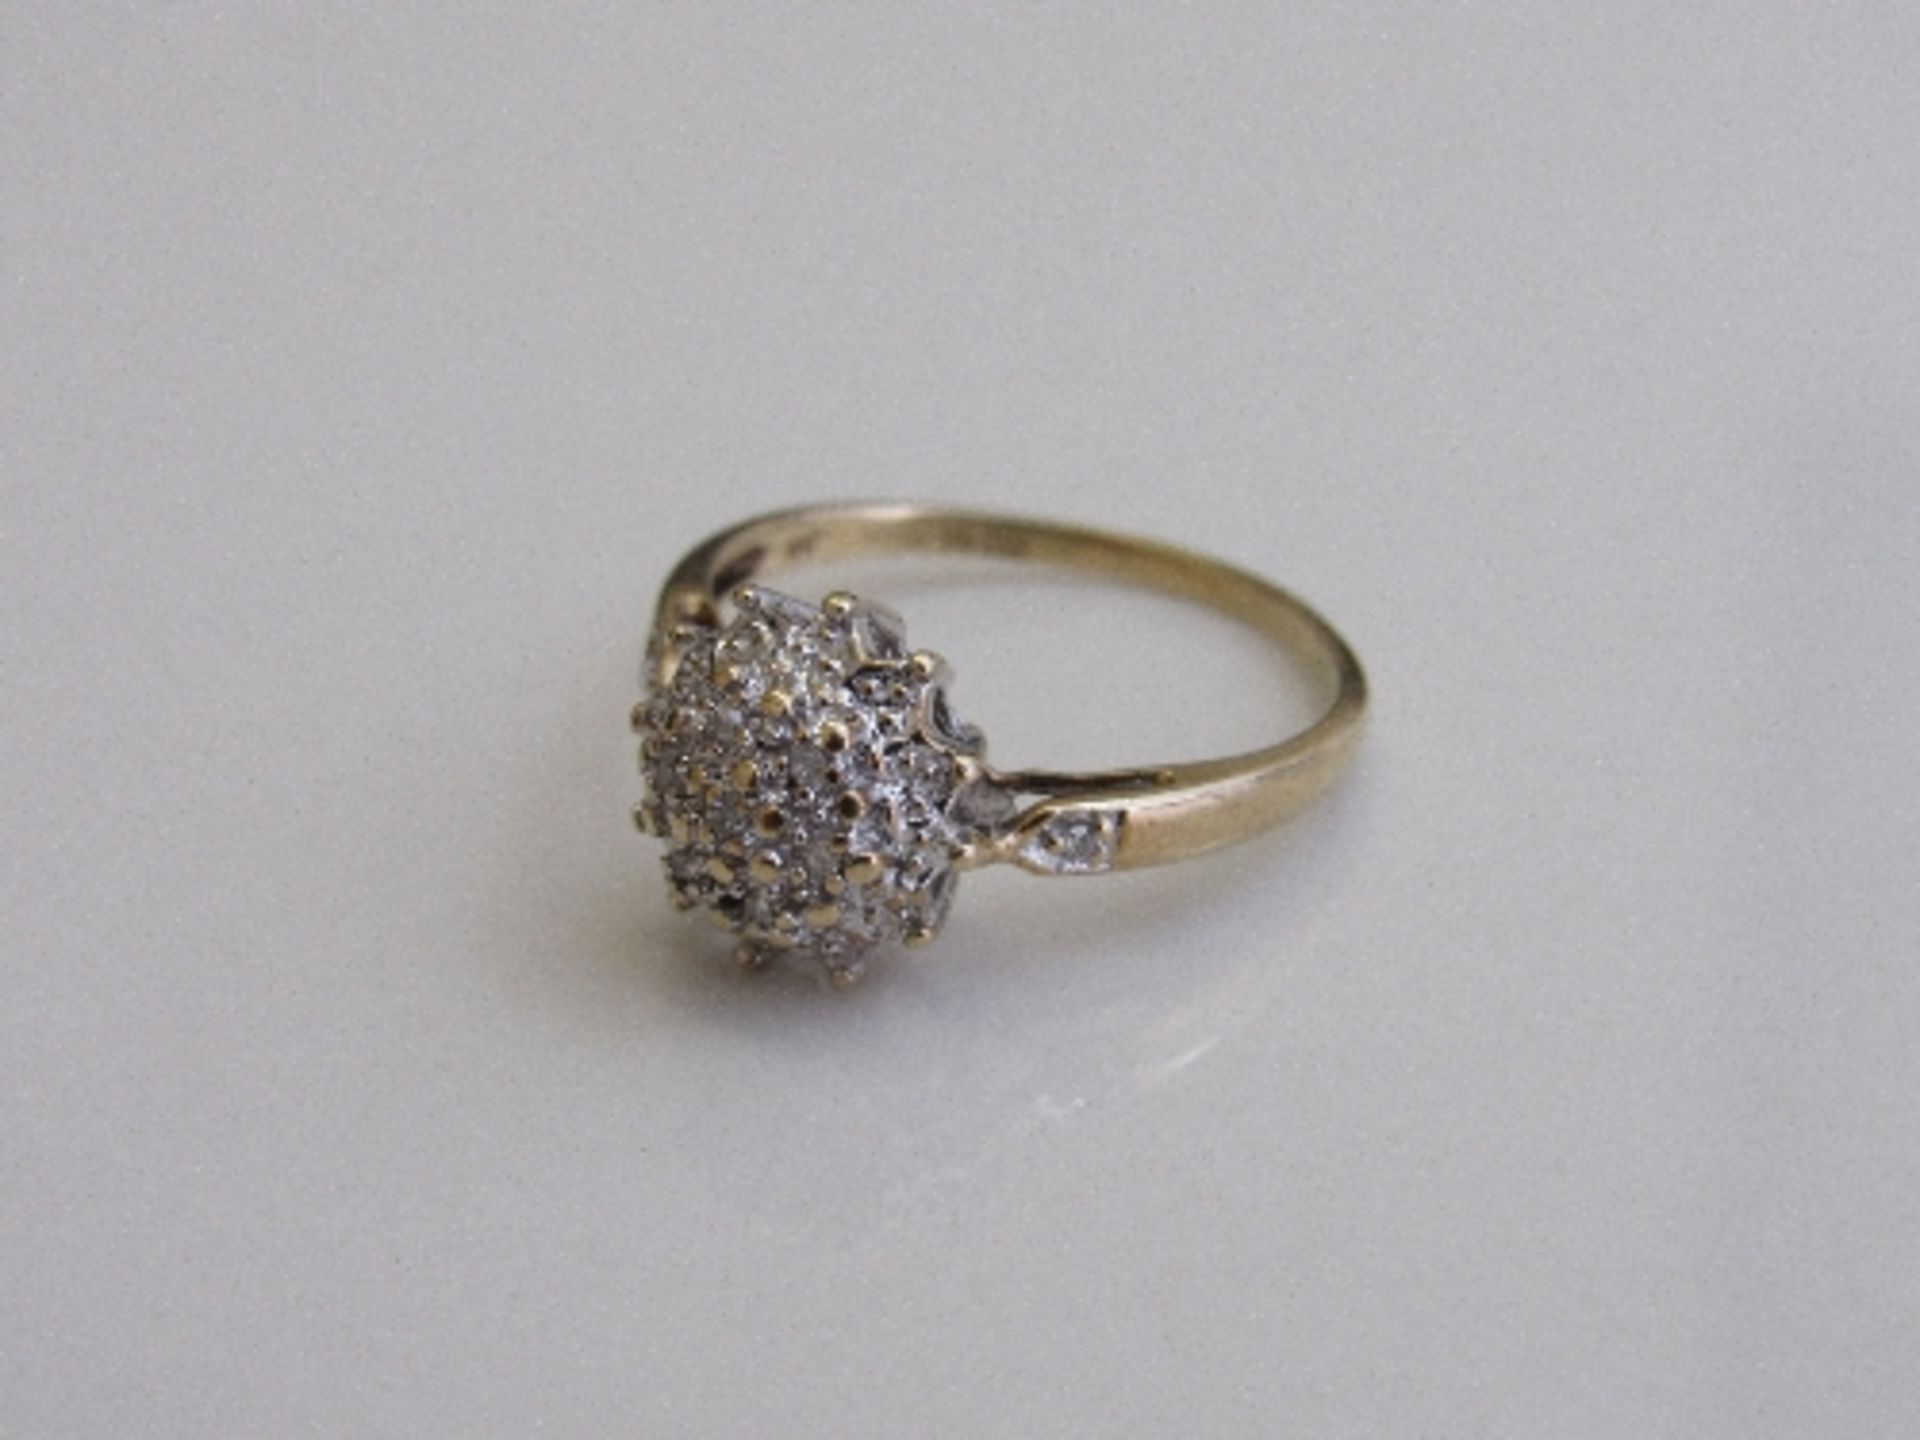 9ct gold & diamond cluster ring, size Q, weight 2.3gms. Estimate £80-100. - Image 2 of 2